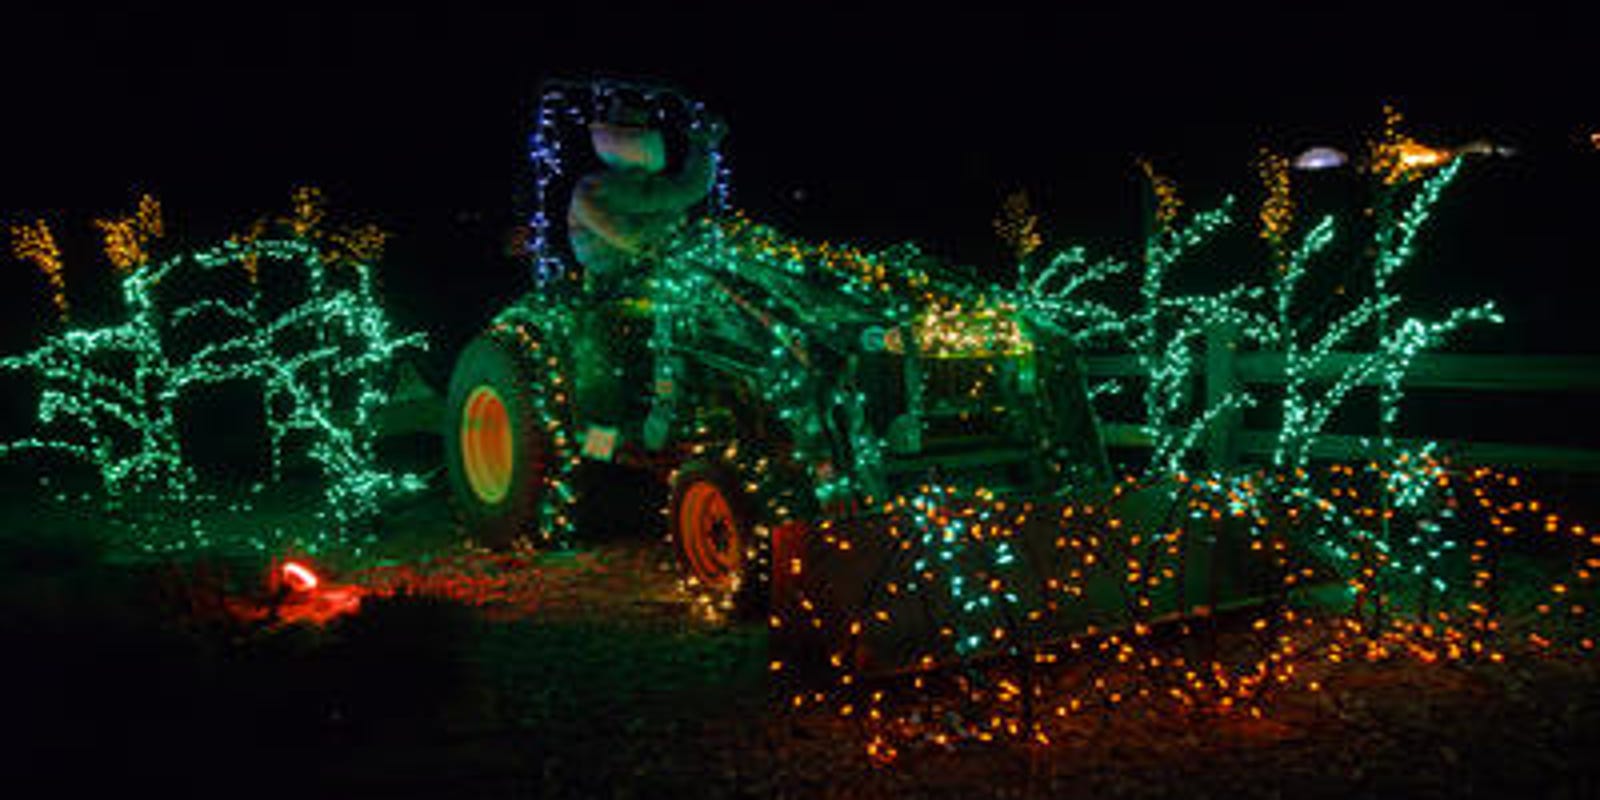 See The Gardens On Spring Creek Light Up For Holidays